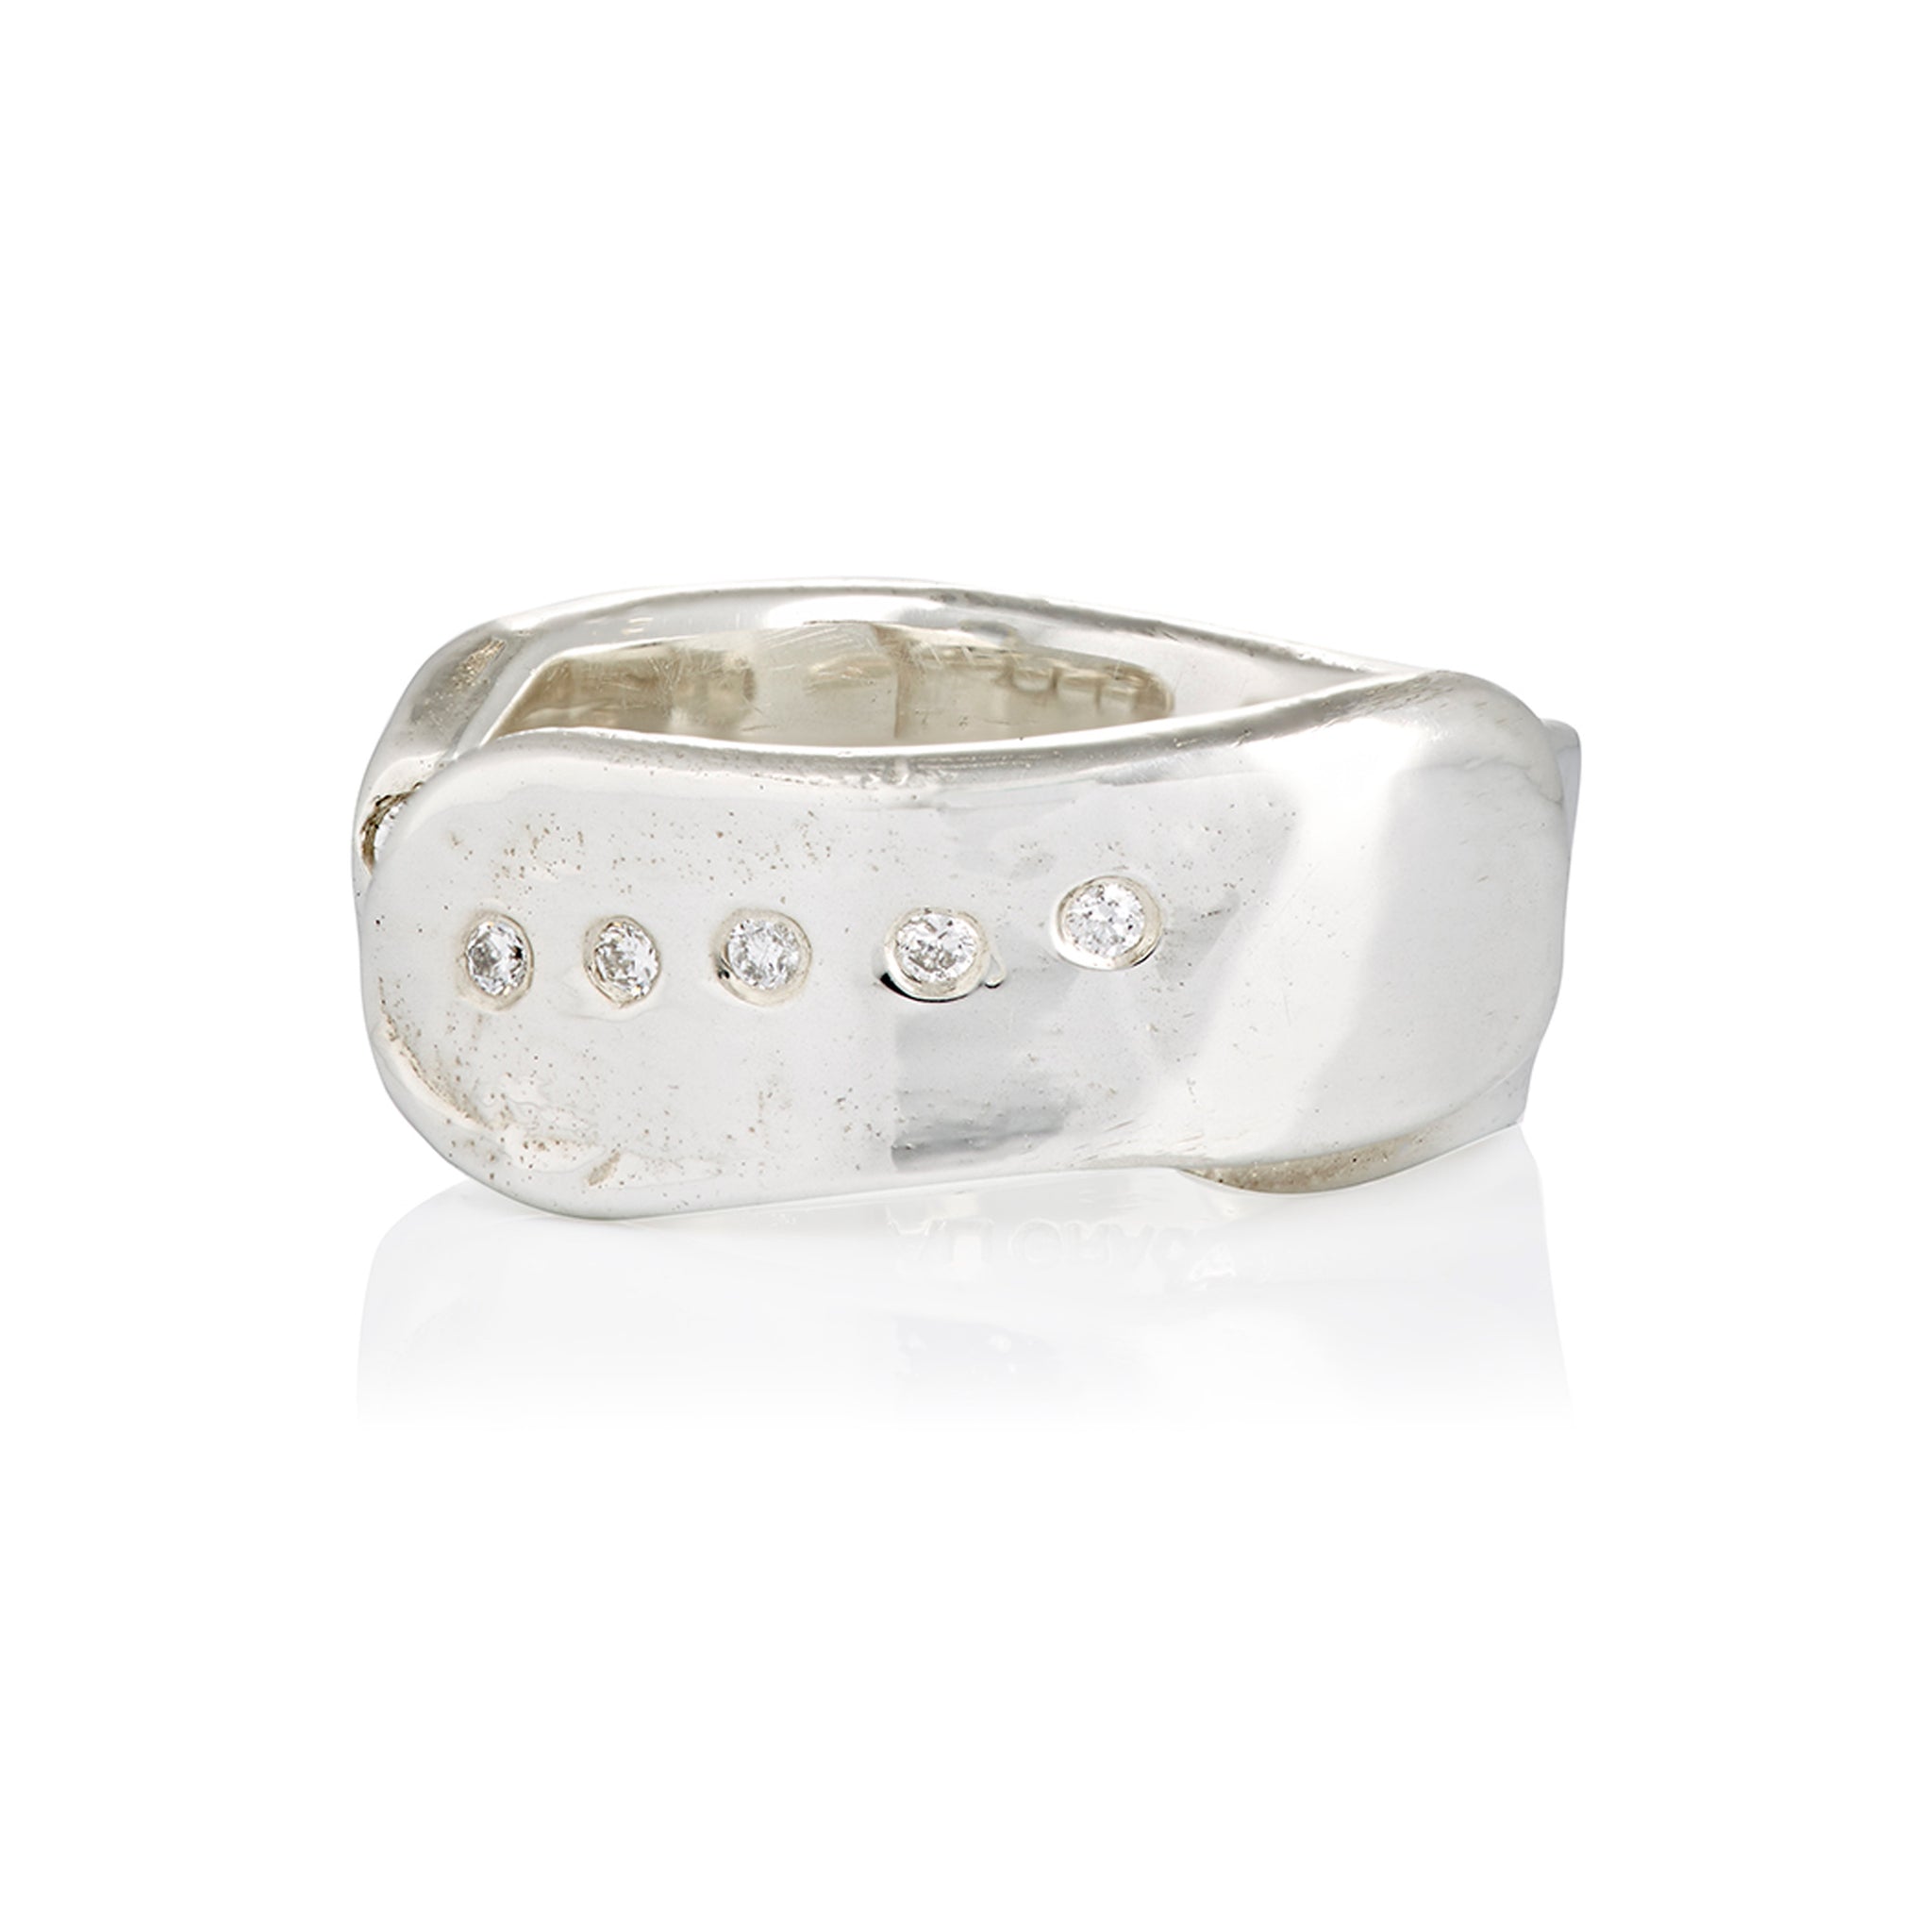 Sterling Silver Textured Open Ring